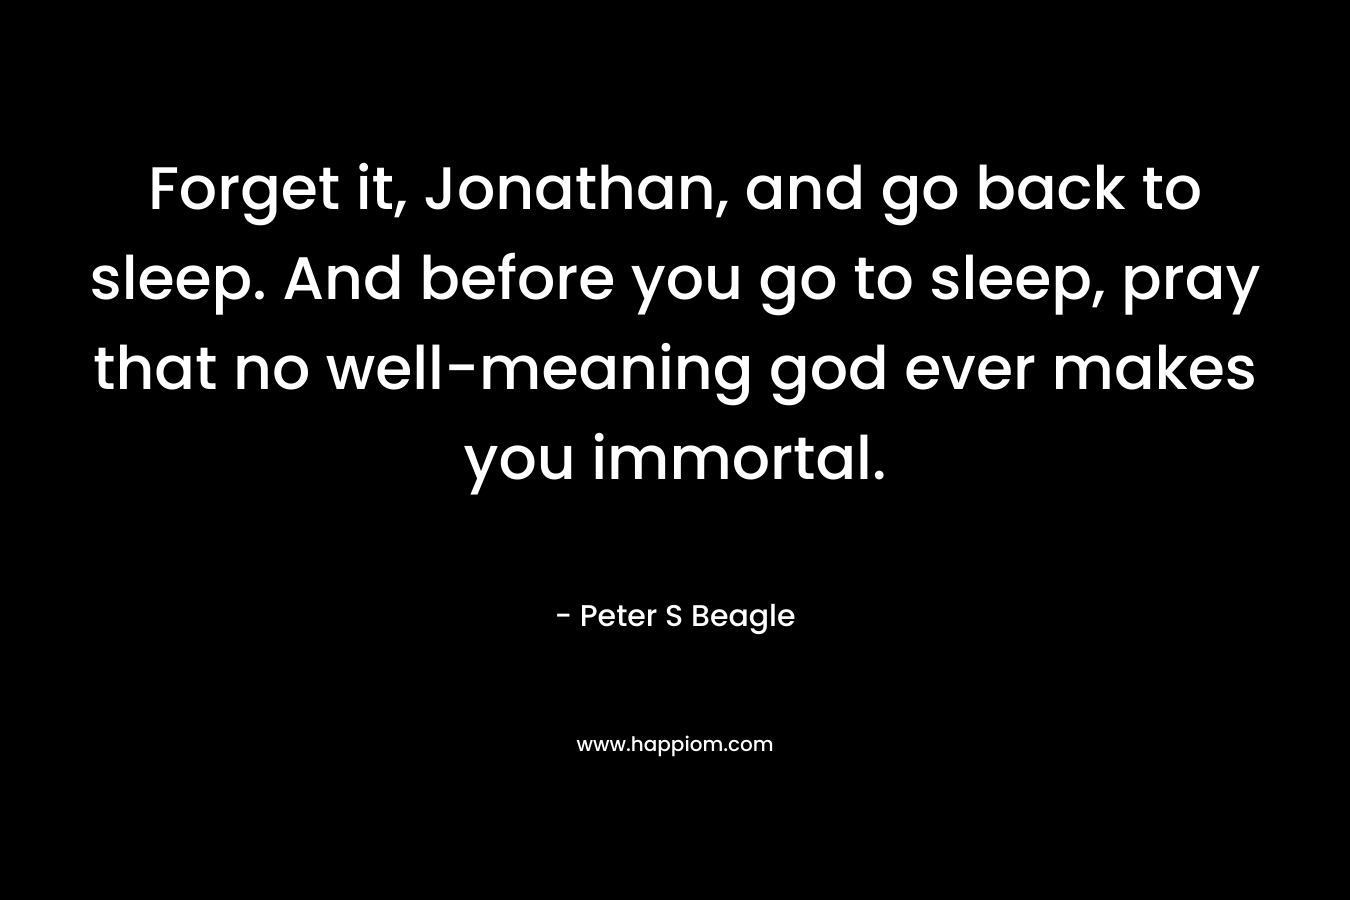 Forget it, Jonathan, and go back to sleep. And before you go to sleep, pray that no well-meaning god ever makes you immortal.